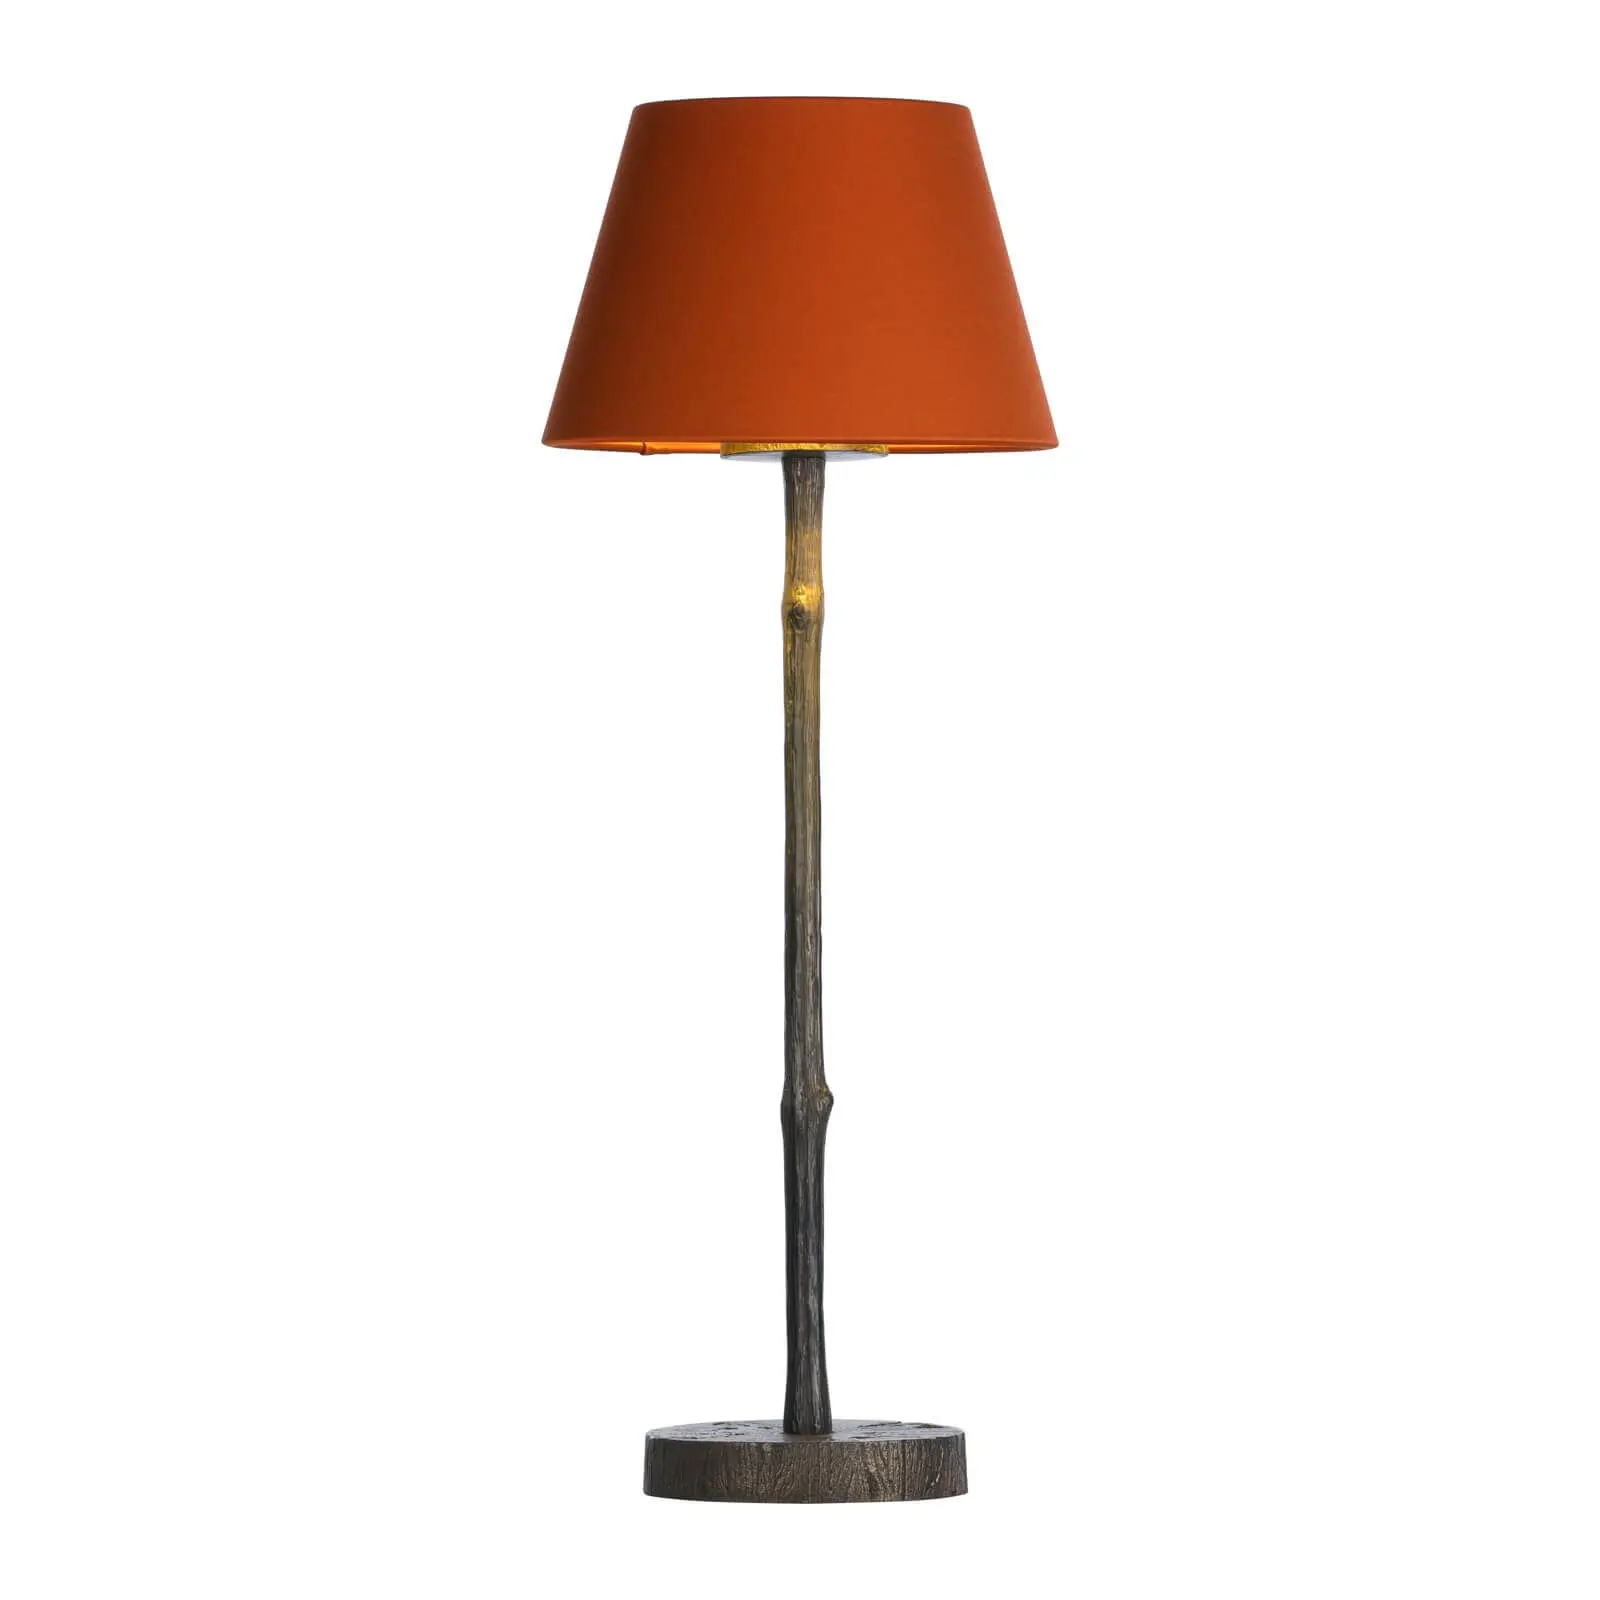 Joshua Bronze Table Lamp Base Only